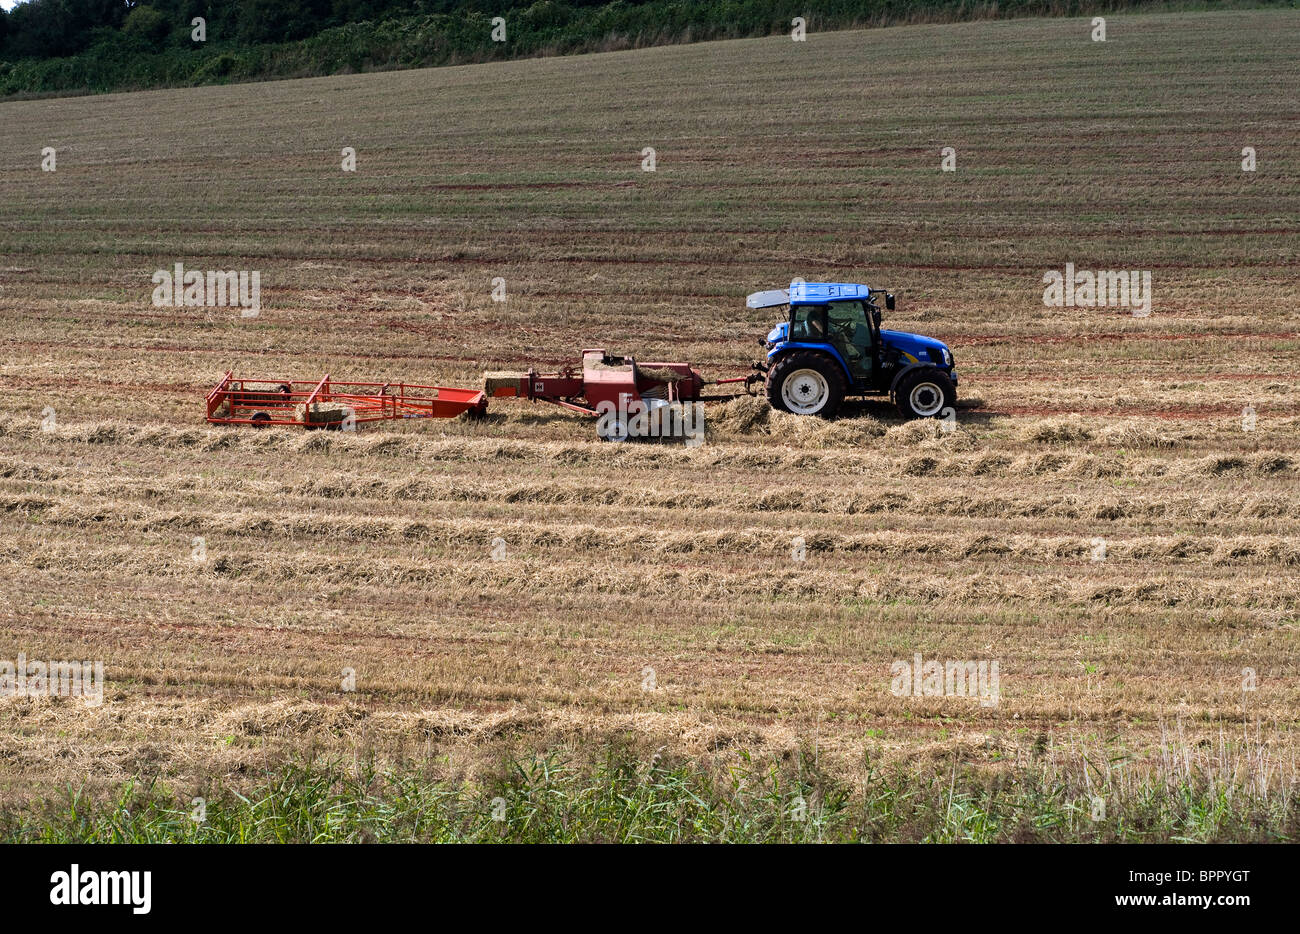 Farmer bailing the hay crop on a slope using older style equipment in ...